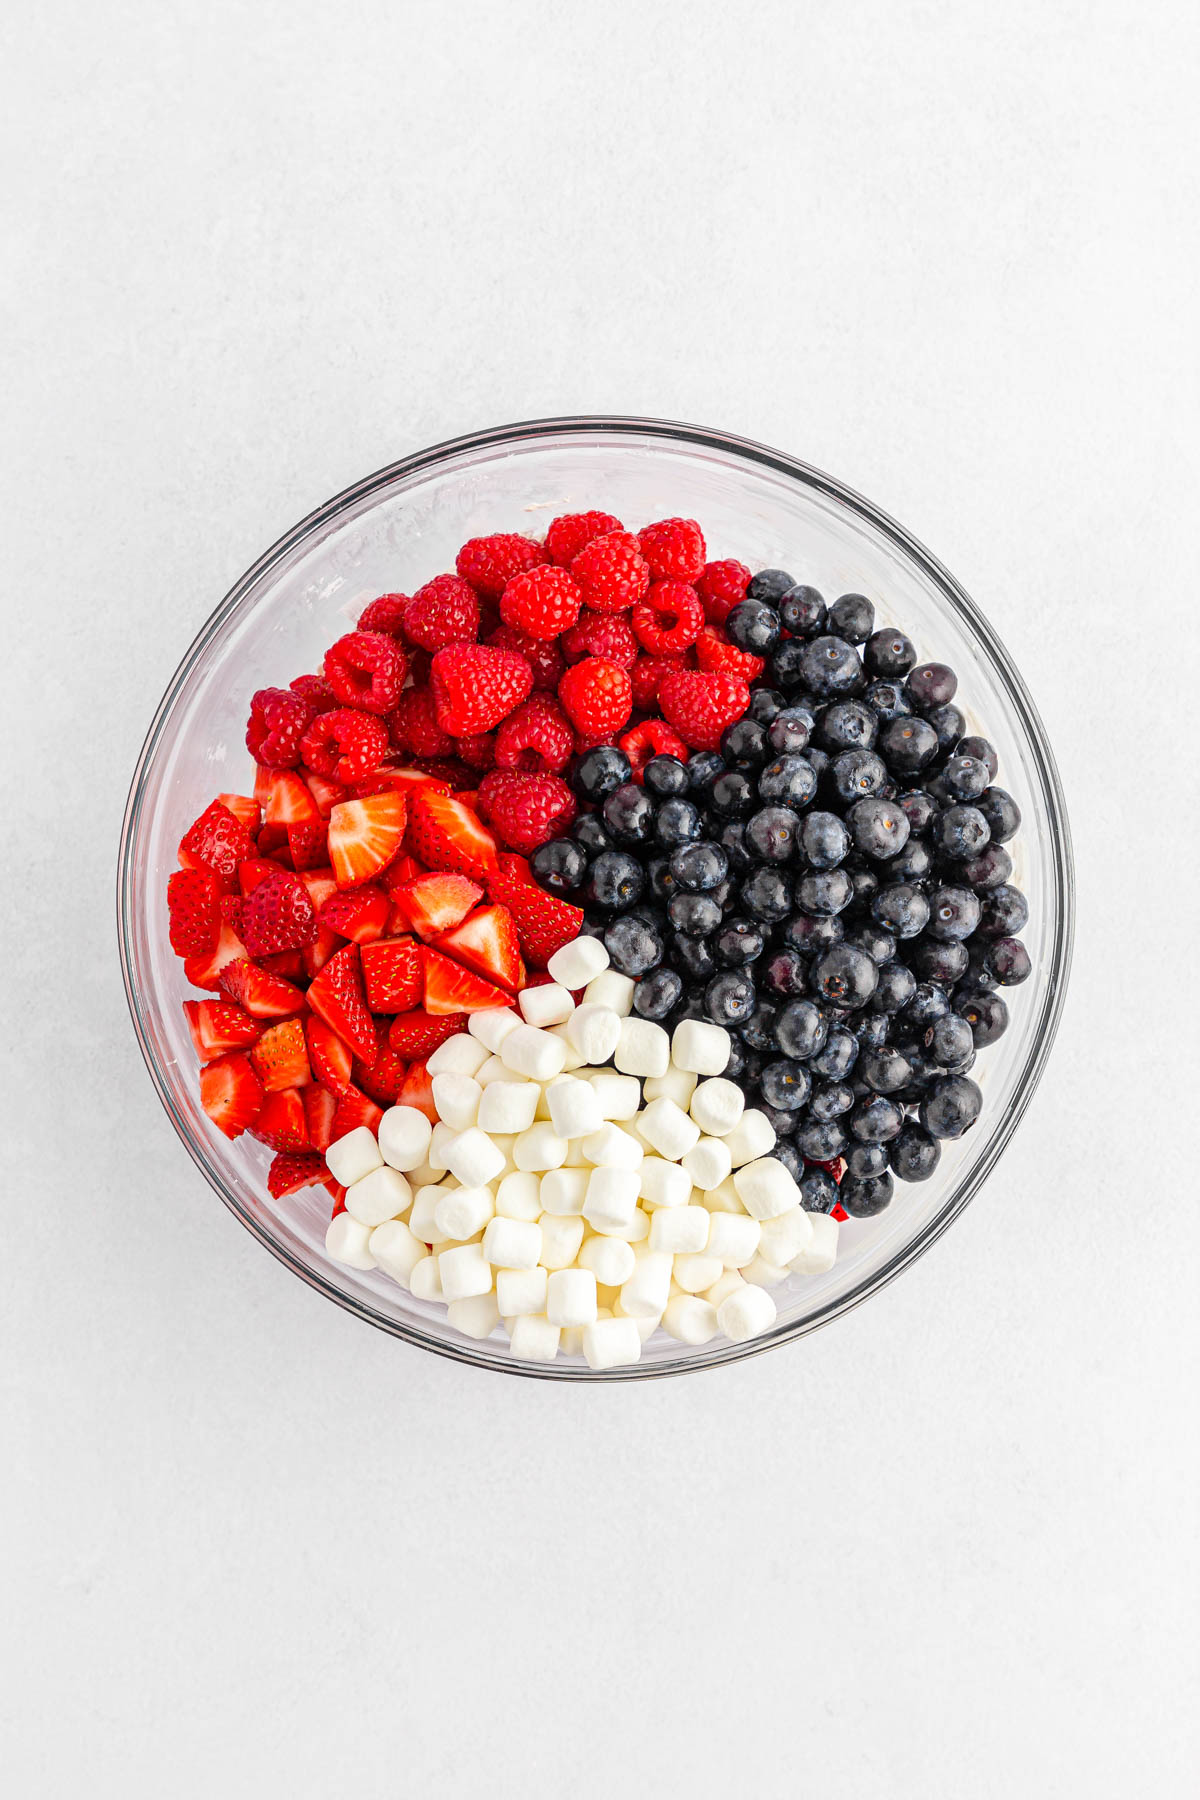 Fruit and marshmallows in glass bowl